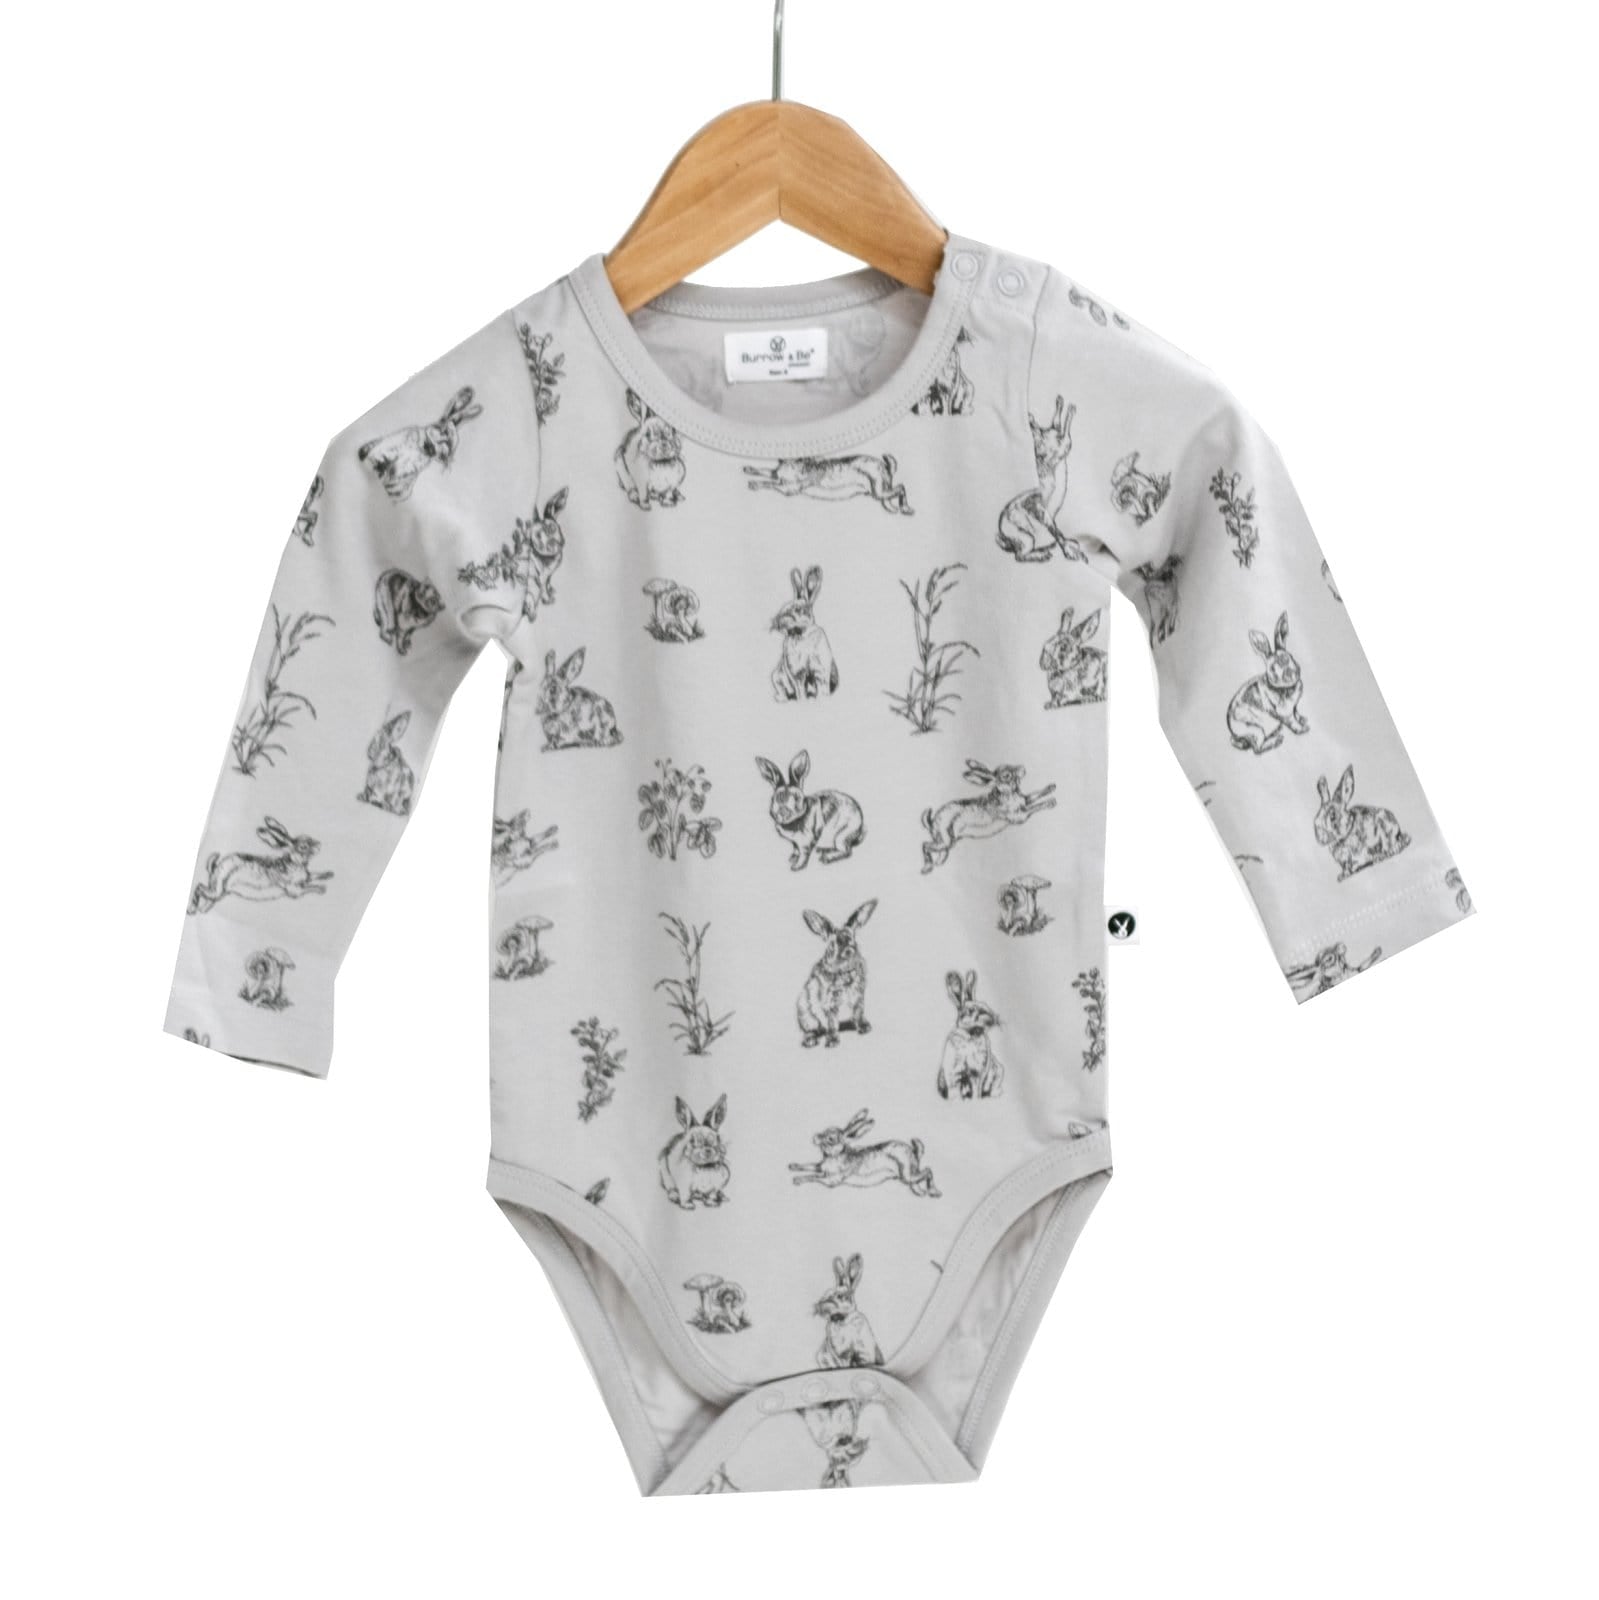 Burrow & Be Unisex Outfit Grey Burrowers / NB Organic L/S Onesie